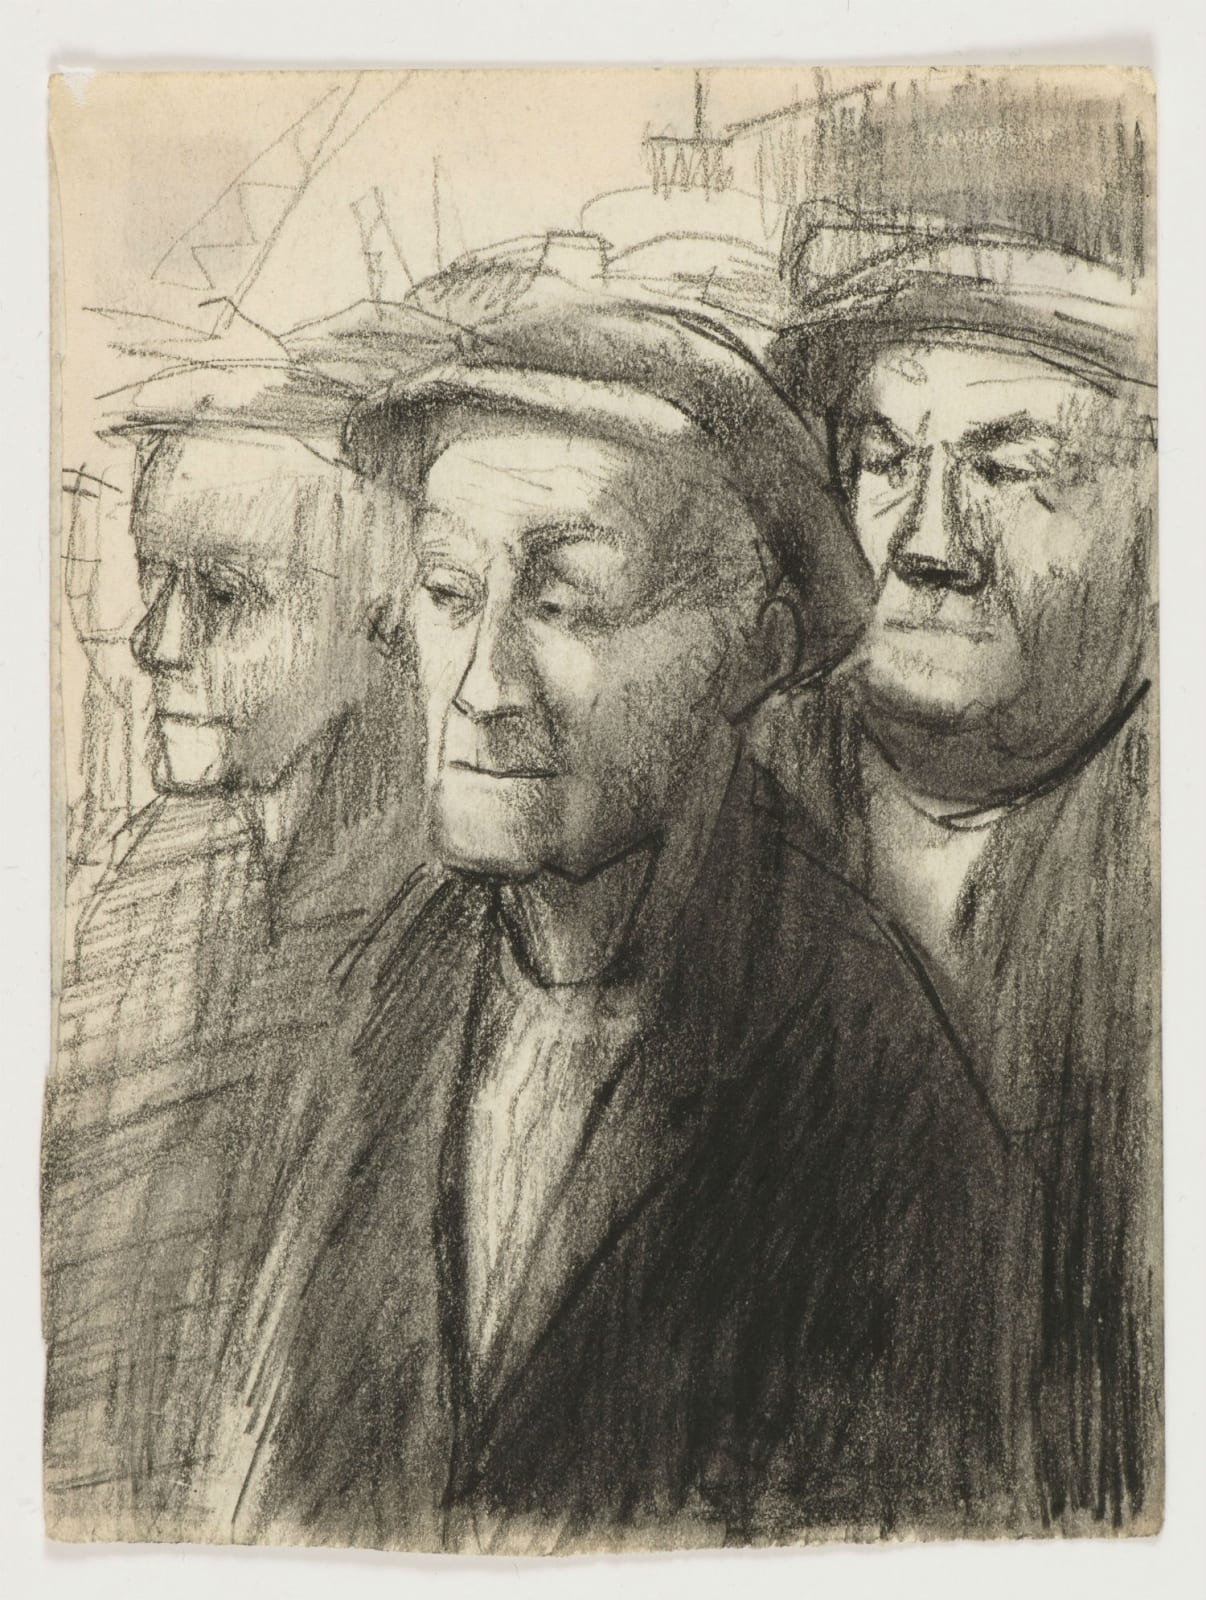 Eva Frankfurther (1930-1959) Victoria Docks (Series of 8 Sketches from 'Whitechapel Diary') 1957 Pencil on paper 14 x 10 cm Private Collection To see and discover more about this artist click here